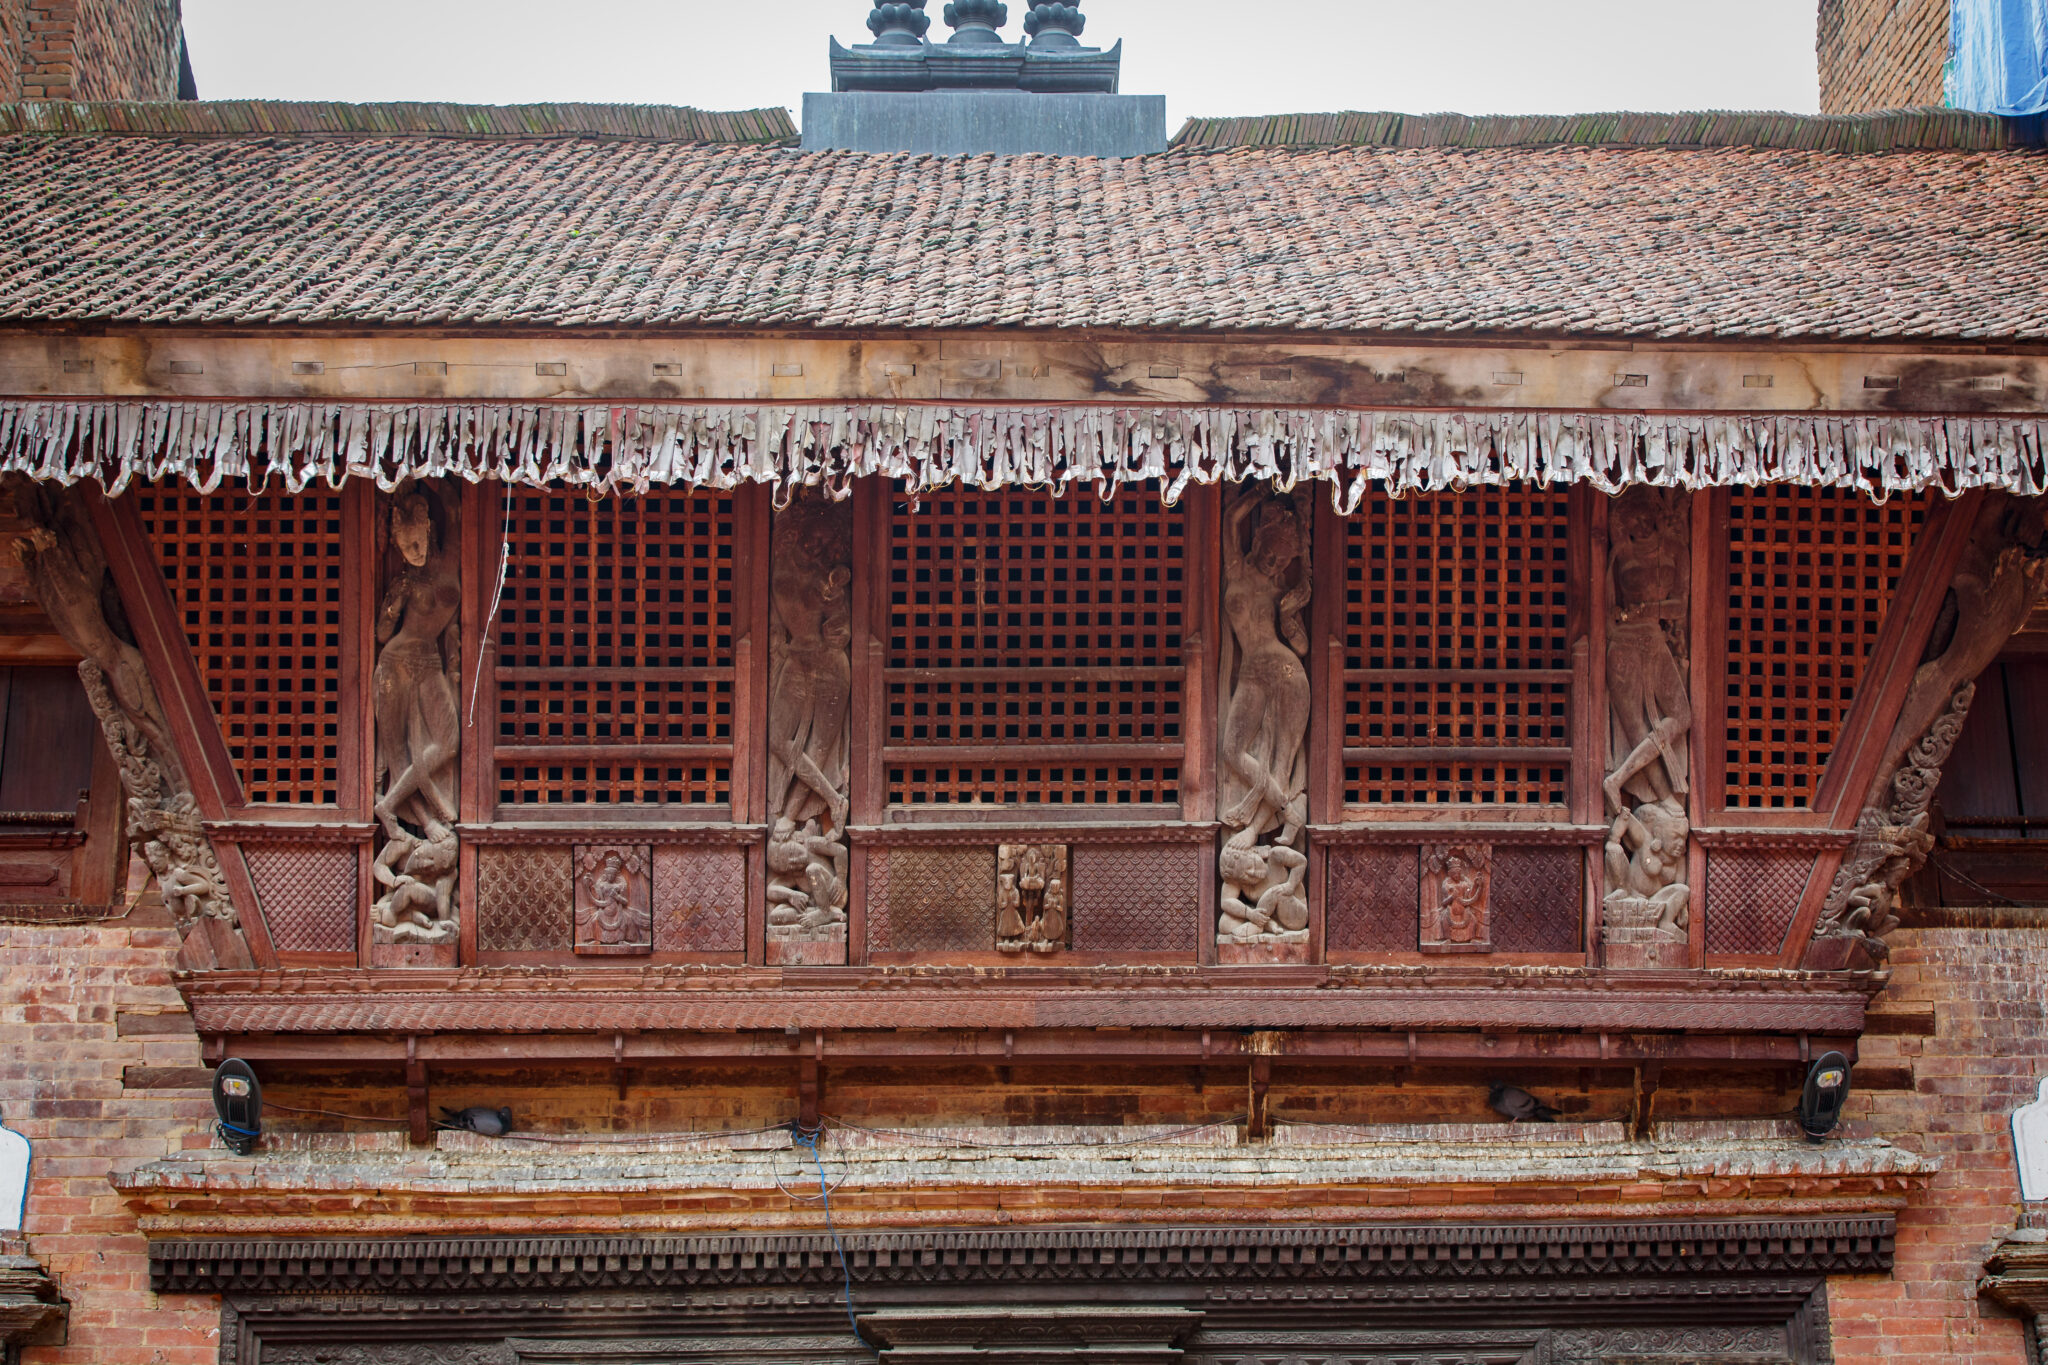 Medium view of five screened windows separated by carved figures on upper story of brick building